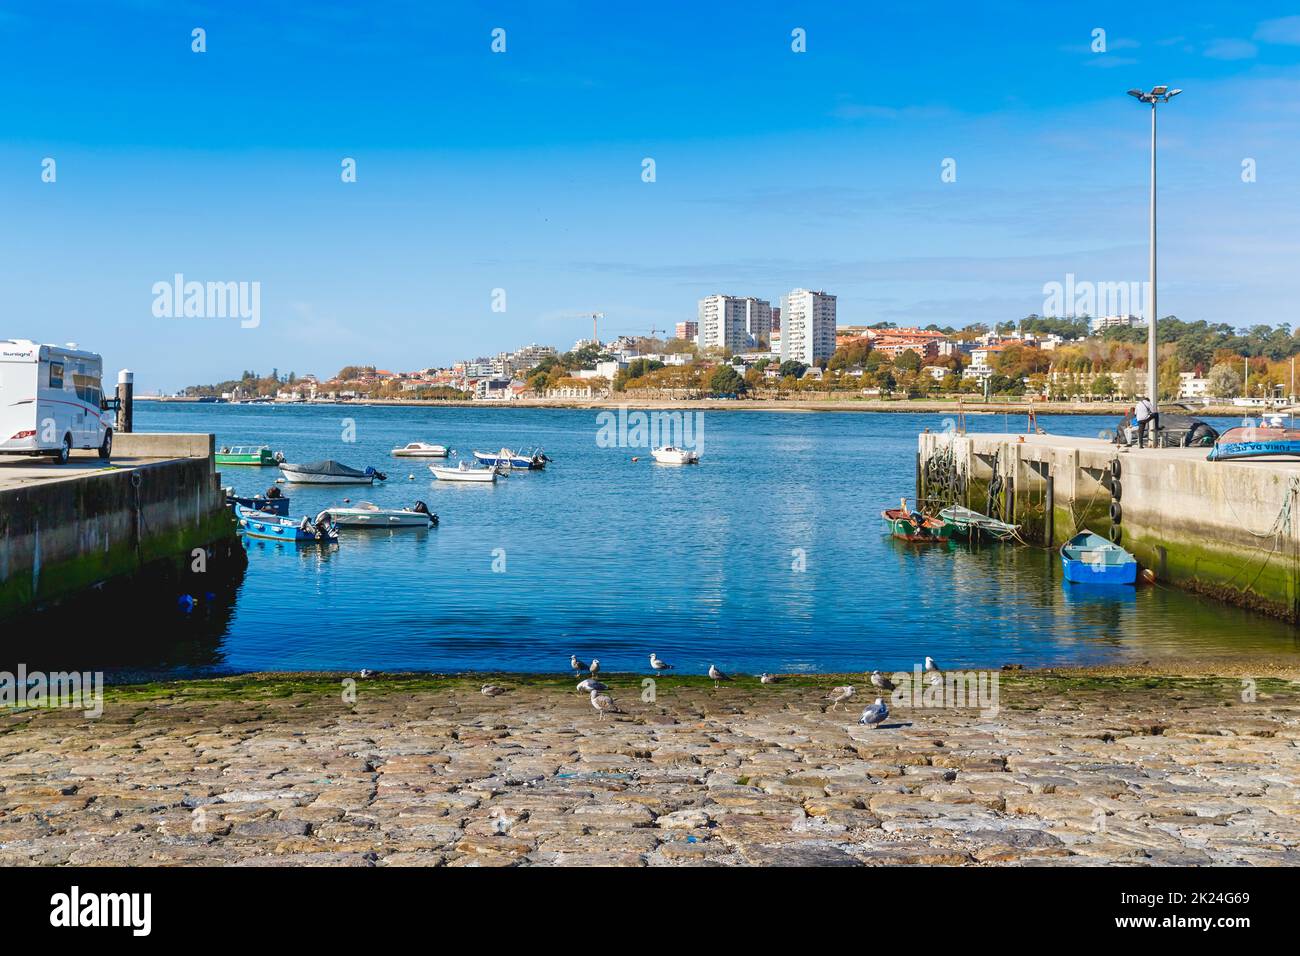 Porto, Portugal - October 23, 2020: Small fishing boats in the fishing port of Afurada at the exit of the mouth of the Douro river on an autumn day Stock Photo